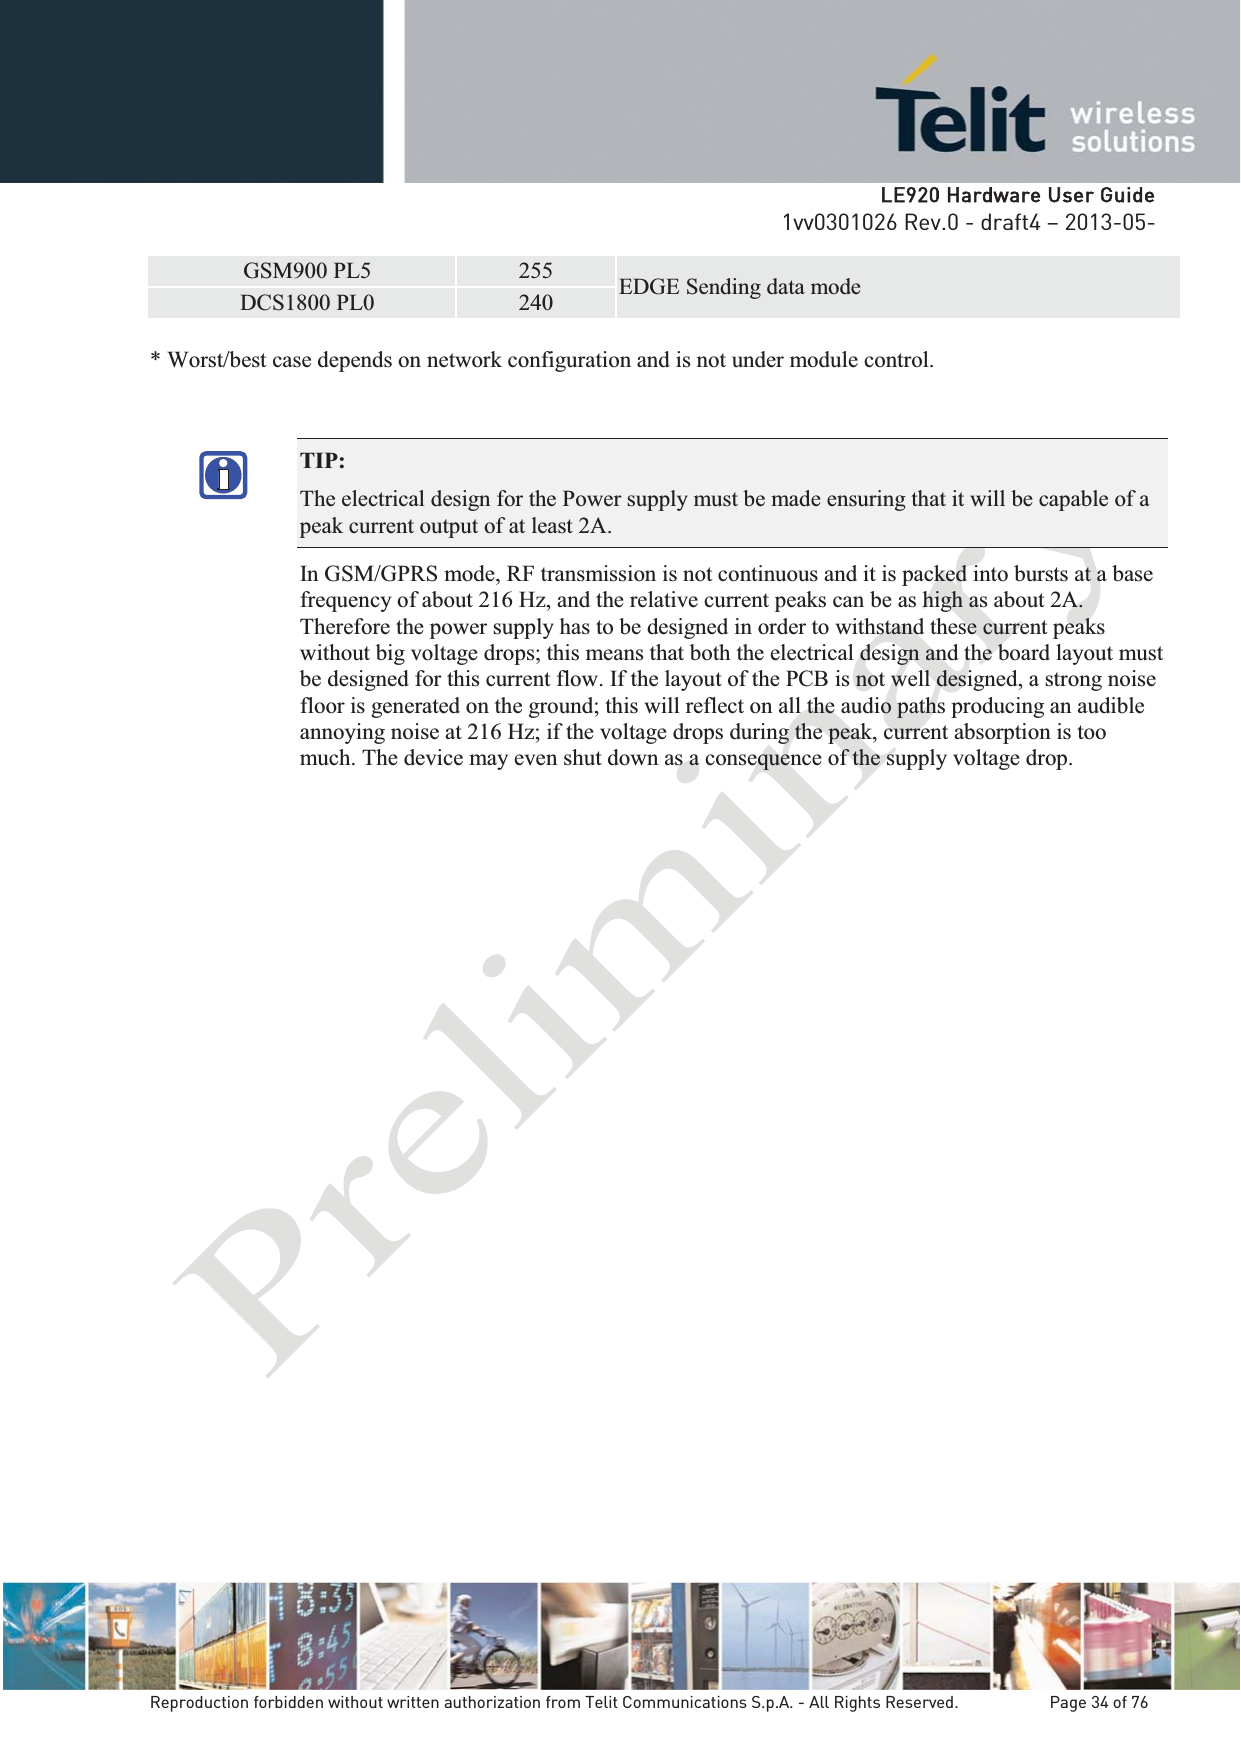   LLE920 Hardware User Guide1vv0301026 Rev.0 - draft4 – 2013-05-Reproduction forbidden without written authorization from Telit Communications S.p.A. - All Rights Reserved.    Page 34 of 76 GSM900 PL5 255 EDGE Sending data modeDCS1800 PL0 240 * Worst/best case depends on network configuration and is not under module control.   TIP:  The electrical design for the Power supply must be made ensuring that it will be capable of a peak current output of at least 2A. In GSM/GPRS mode, RF transmission is not continuous and it is packed into bursts at a base frequency of about 216 Hz, and the relative current peaks can be as high as about 2A. Therefore the power supply has to be designed in order to withstand these current peaks without big voltage drops; this means that both the electrical design and the board layout must be designed for this current flow. If the layout of the PCB is not well designed, a strong noise floor is generated on the ground; this will reflect on all the audio paths producing an audible annoying noise at 216 Hz; if the voltage drops during the peak, current absorption is too much. The device may even shut down as a consequence of the supply voltage drop. 